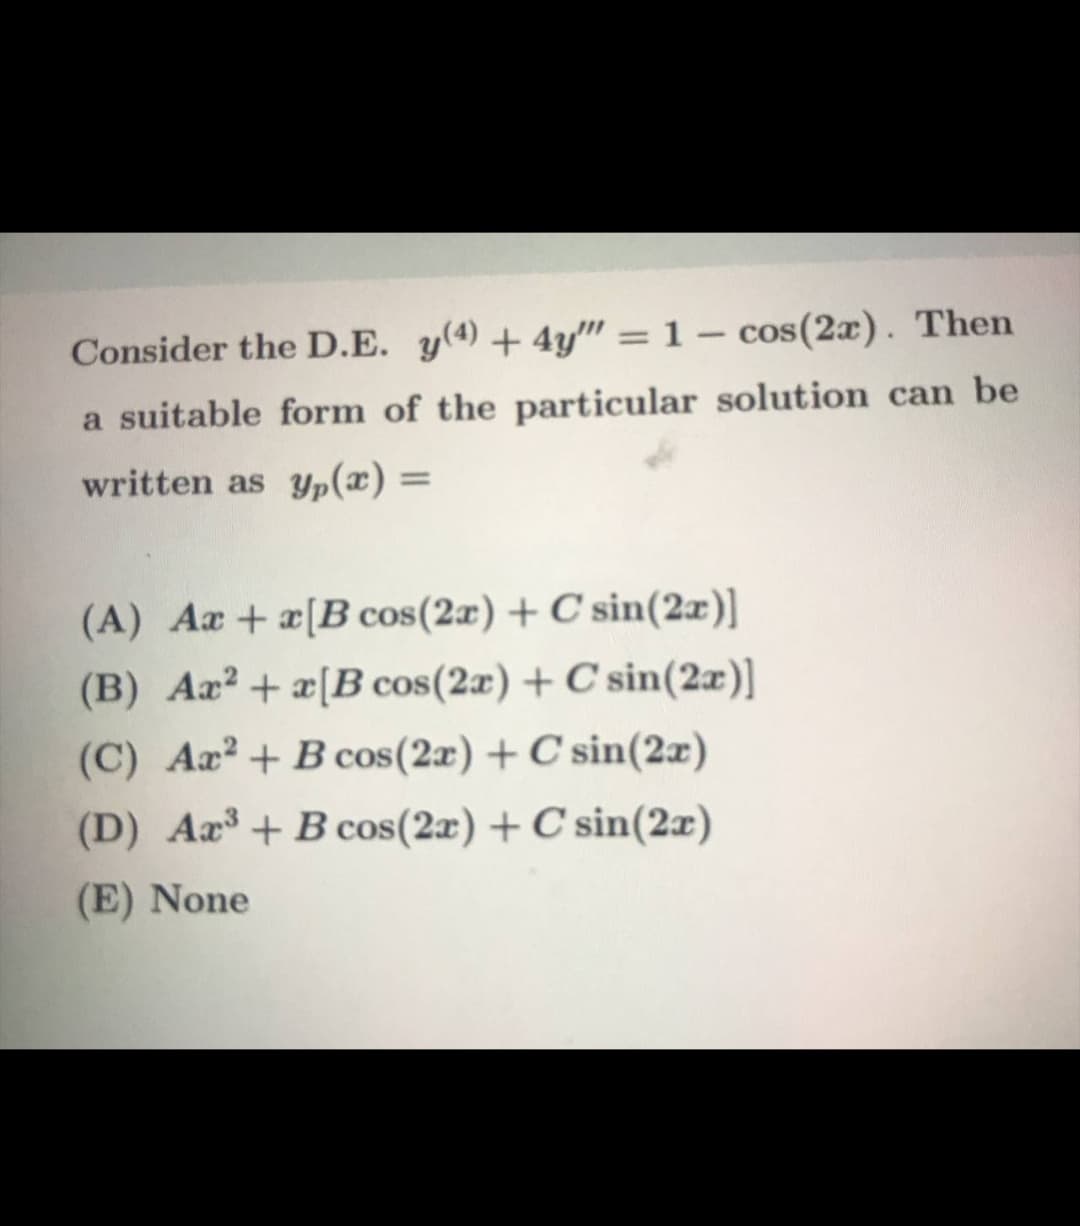 Consider the D.E. y(4) + 4y" = 1 – cos(2x). Then
a suitable form of the particular solution can be
written as yp(x) =
%3D
(A) Ar +x[B cos(2x) + C sin(2x)]
(B) Ax? + x[B cos(2æ) + C sin(2æ)]
(C) Aa?+ B cos(2x) + C sin(2x)
(D) Ar³ + B cos(2x) + C sin(2x)
(E) None
